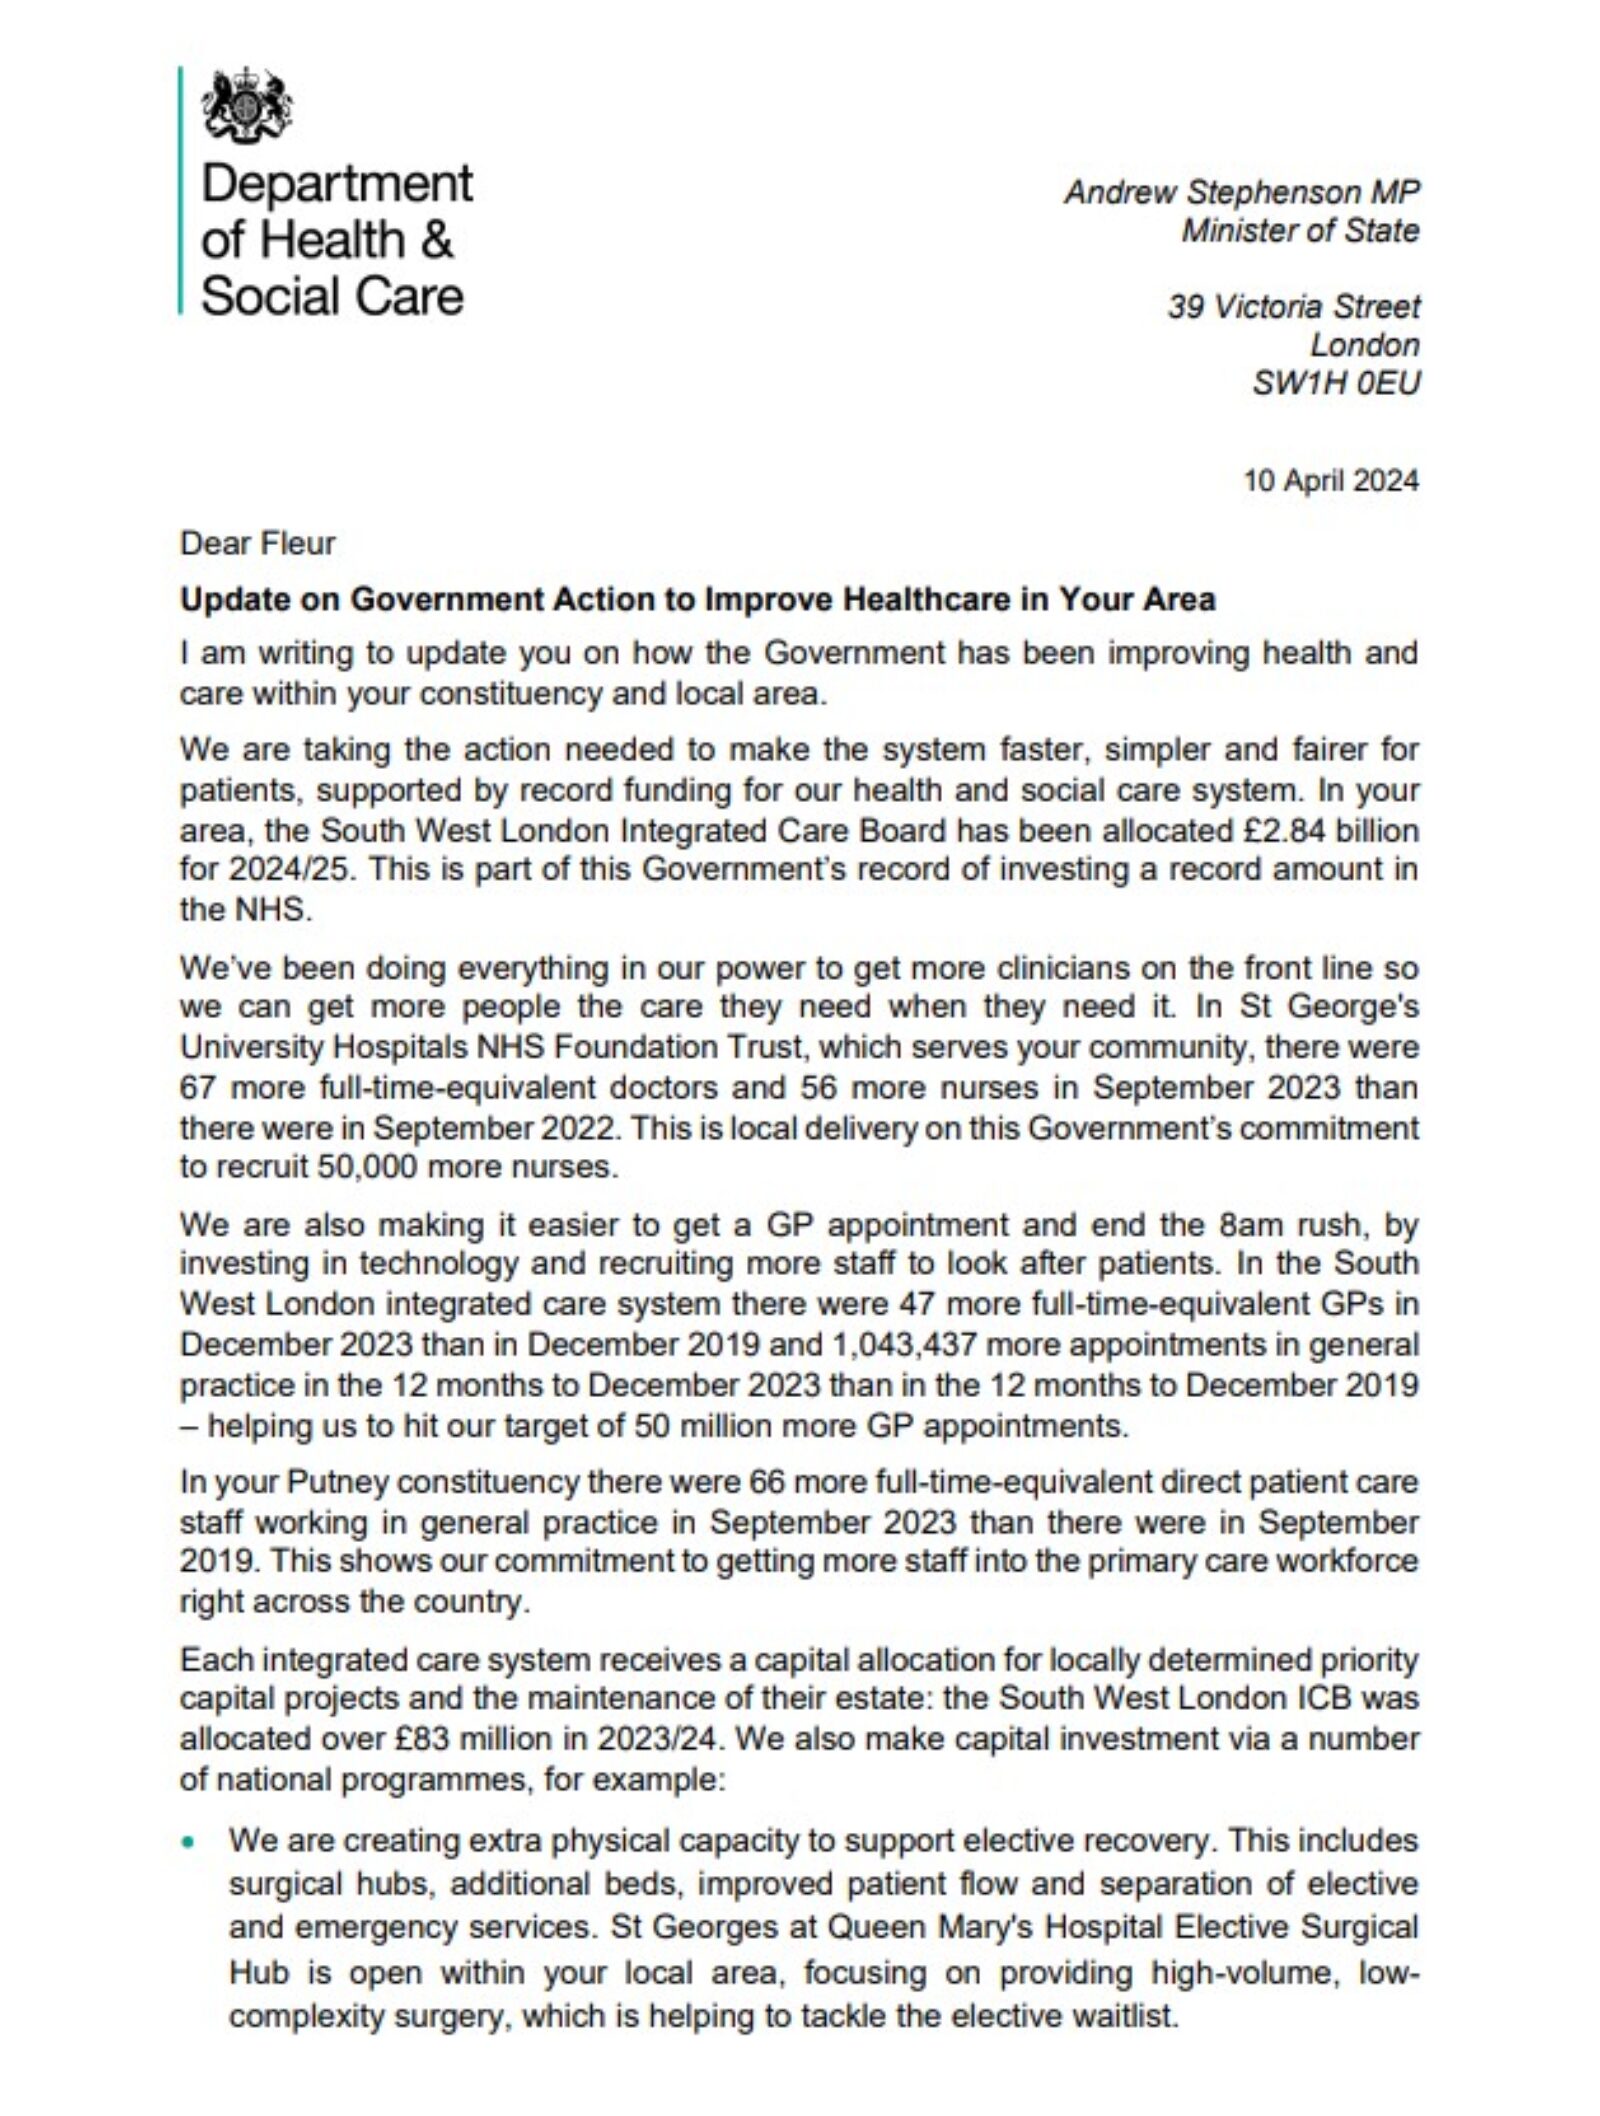 Letter from Government Minister: Update on Government action to improve healthcare in your area